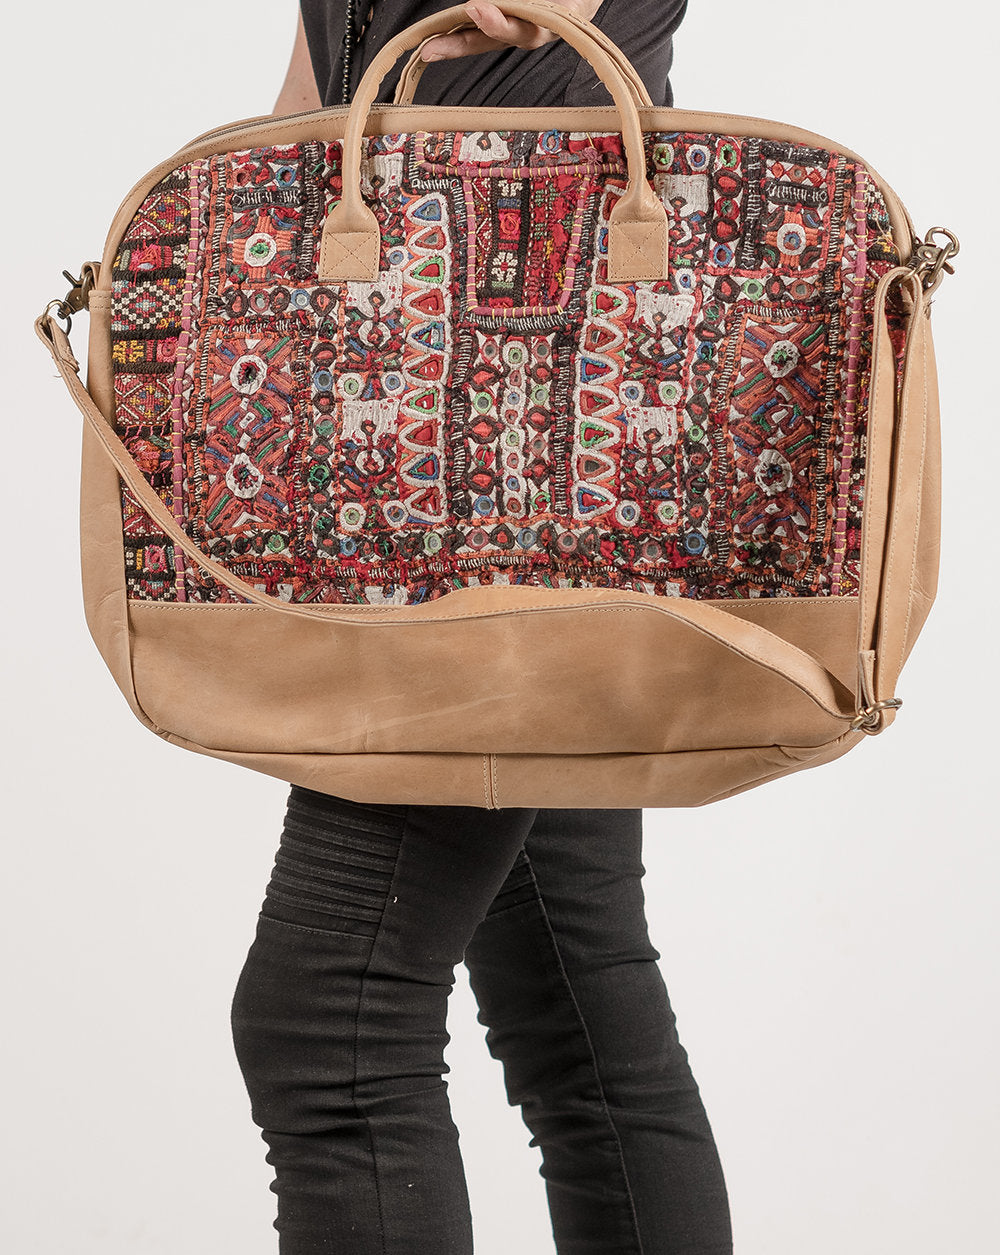 Detail of Leather Boho Laptop Bag with Antique Embroidery